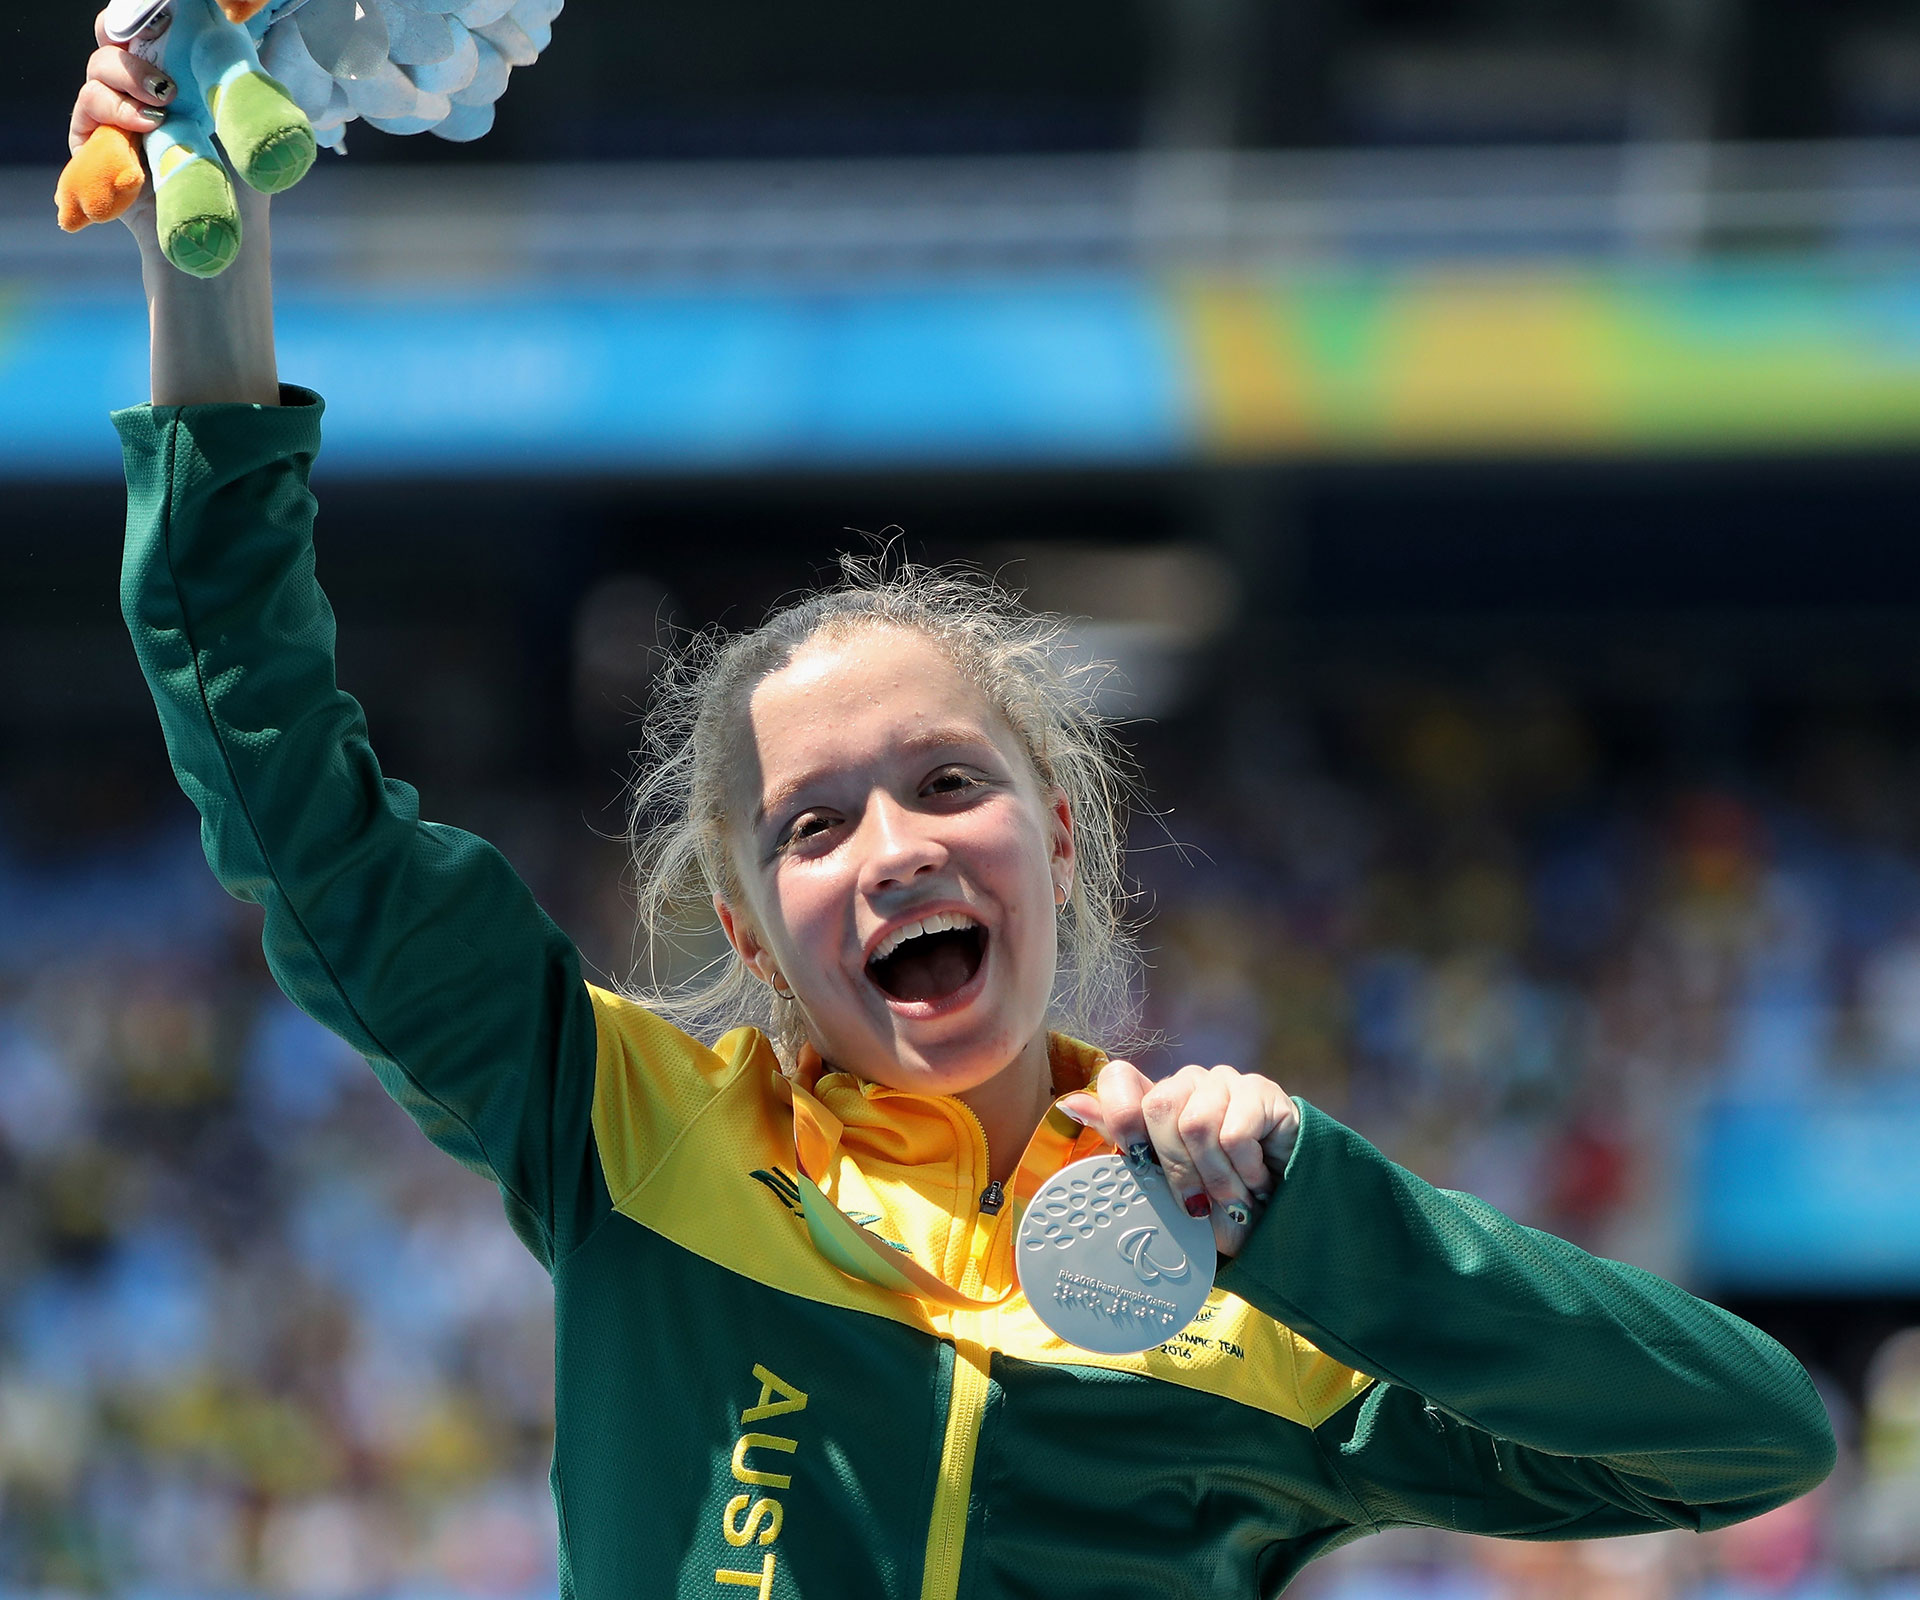 Teen Paralympic medallist capturing the hearts of the nation